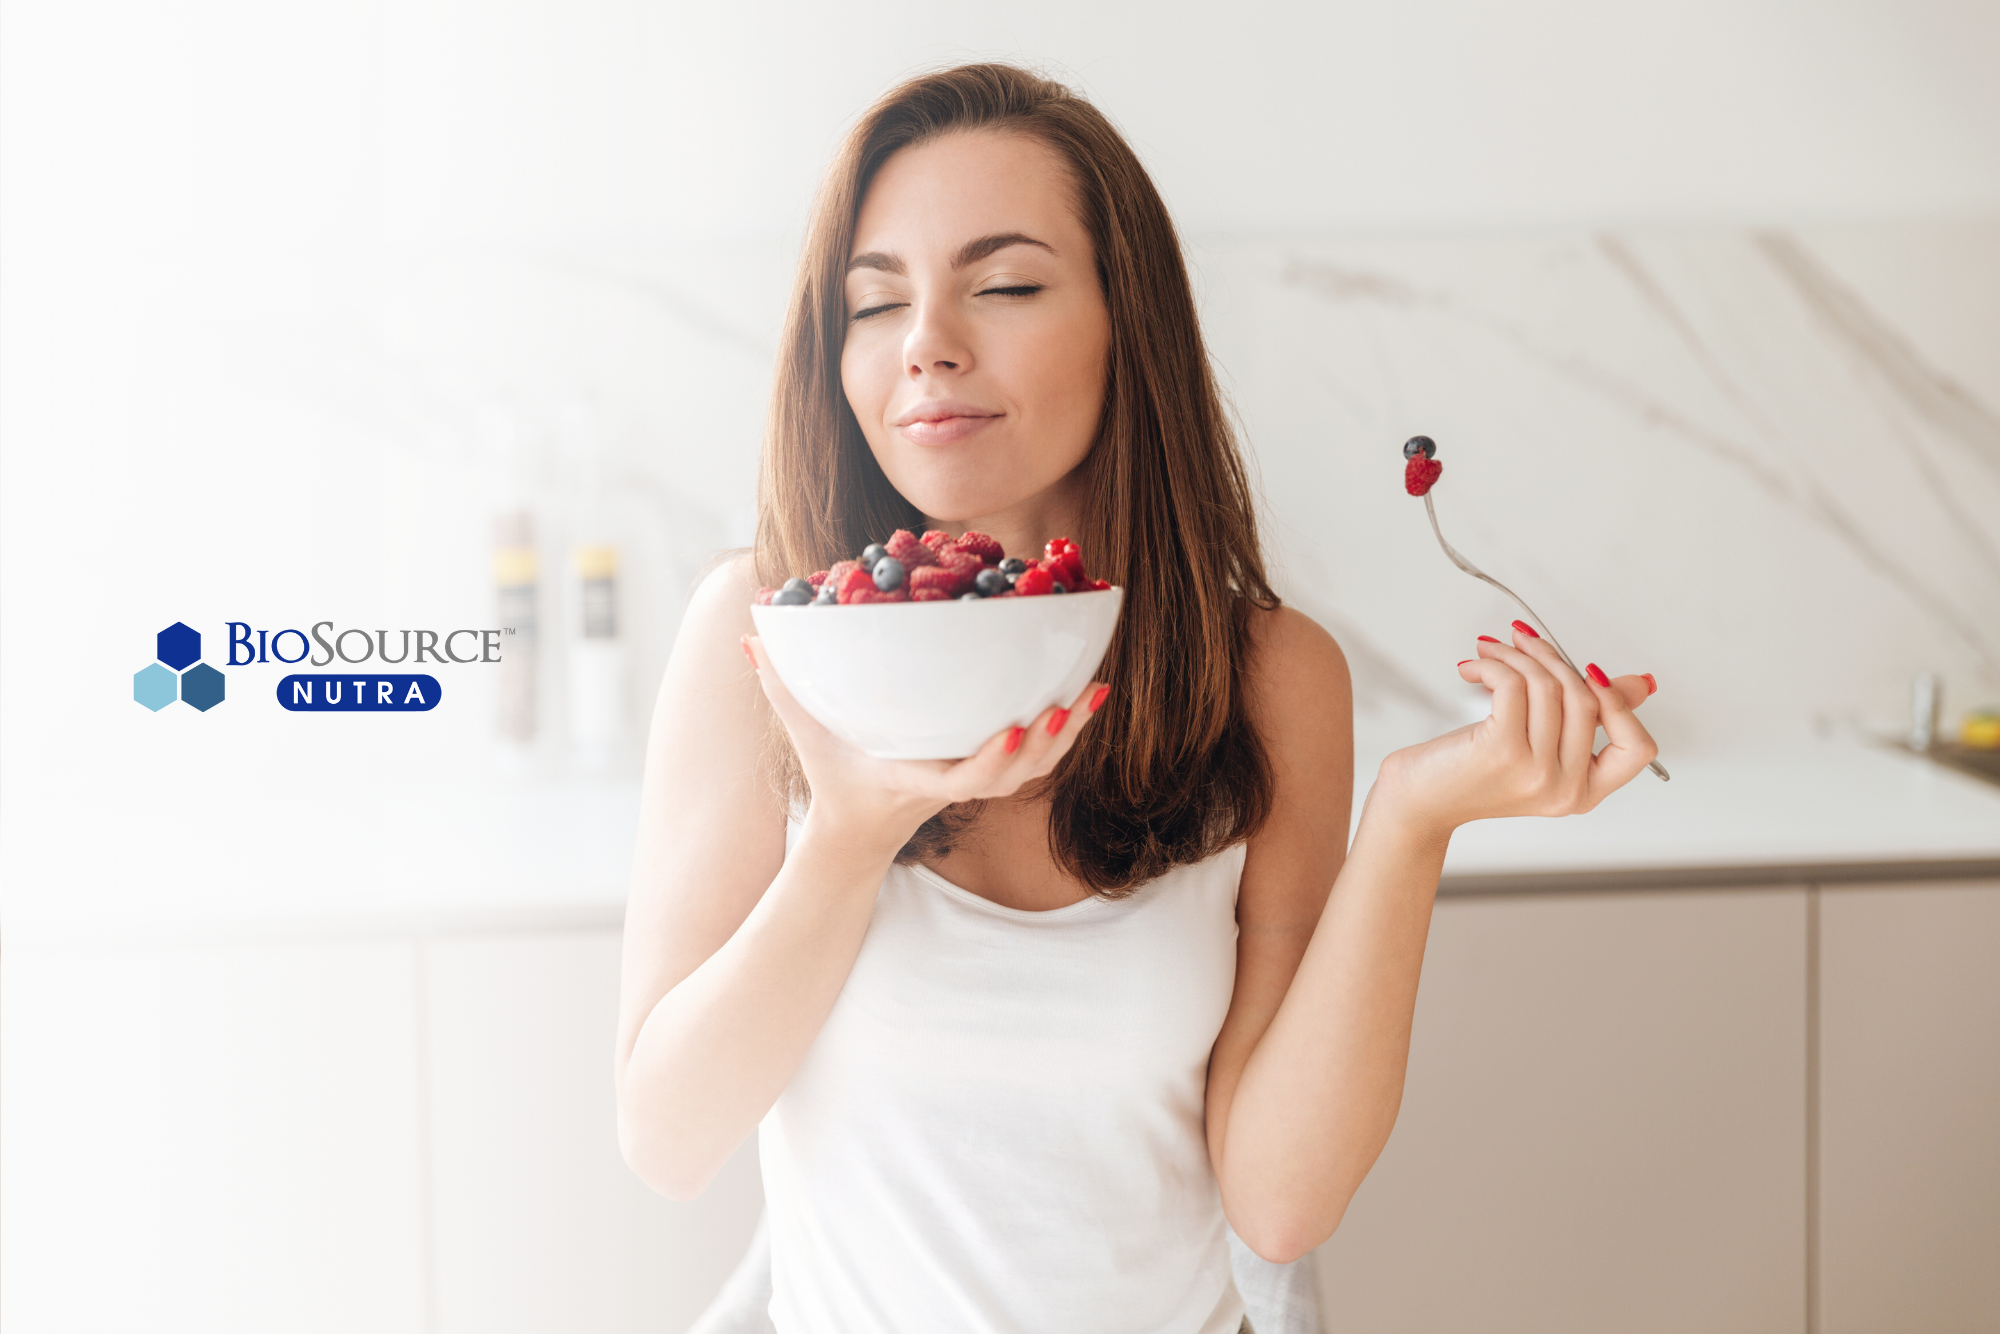 A young woman enjoys a breakfast of berries and oats